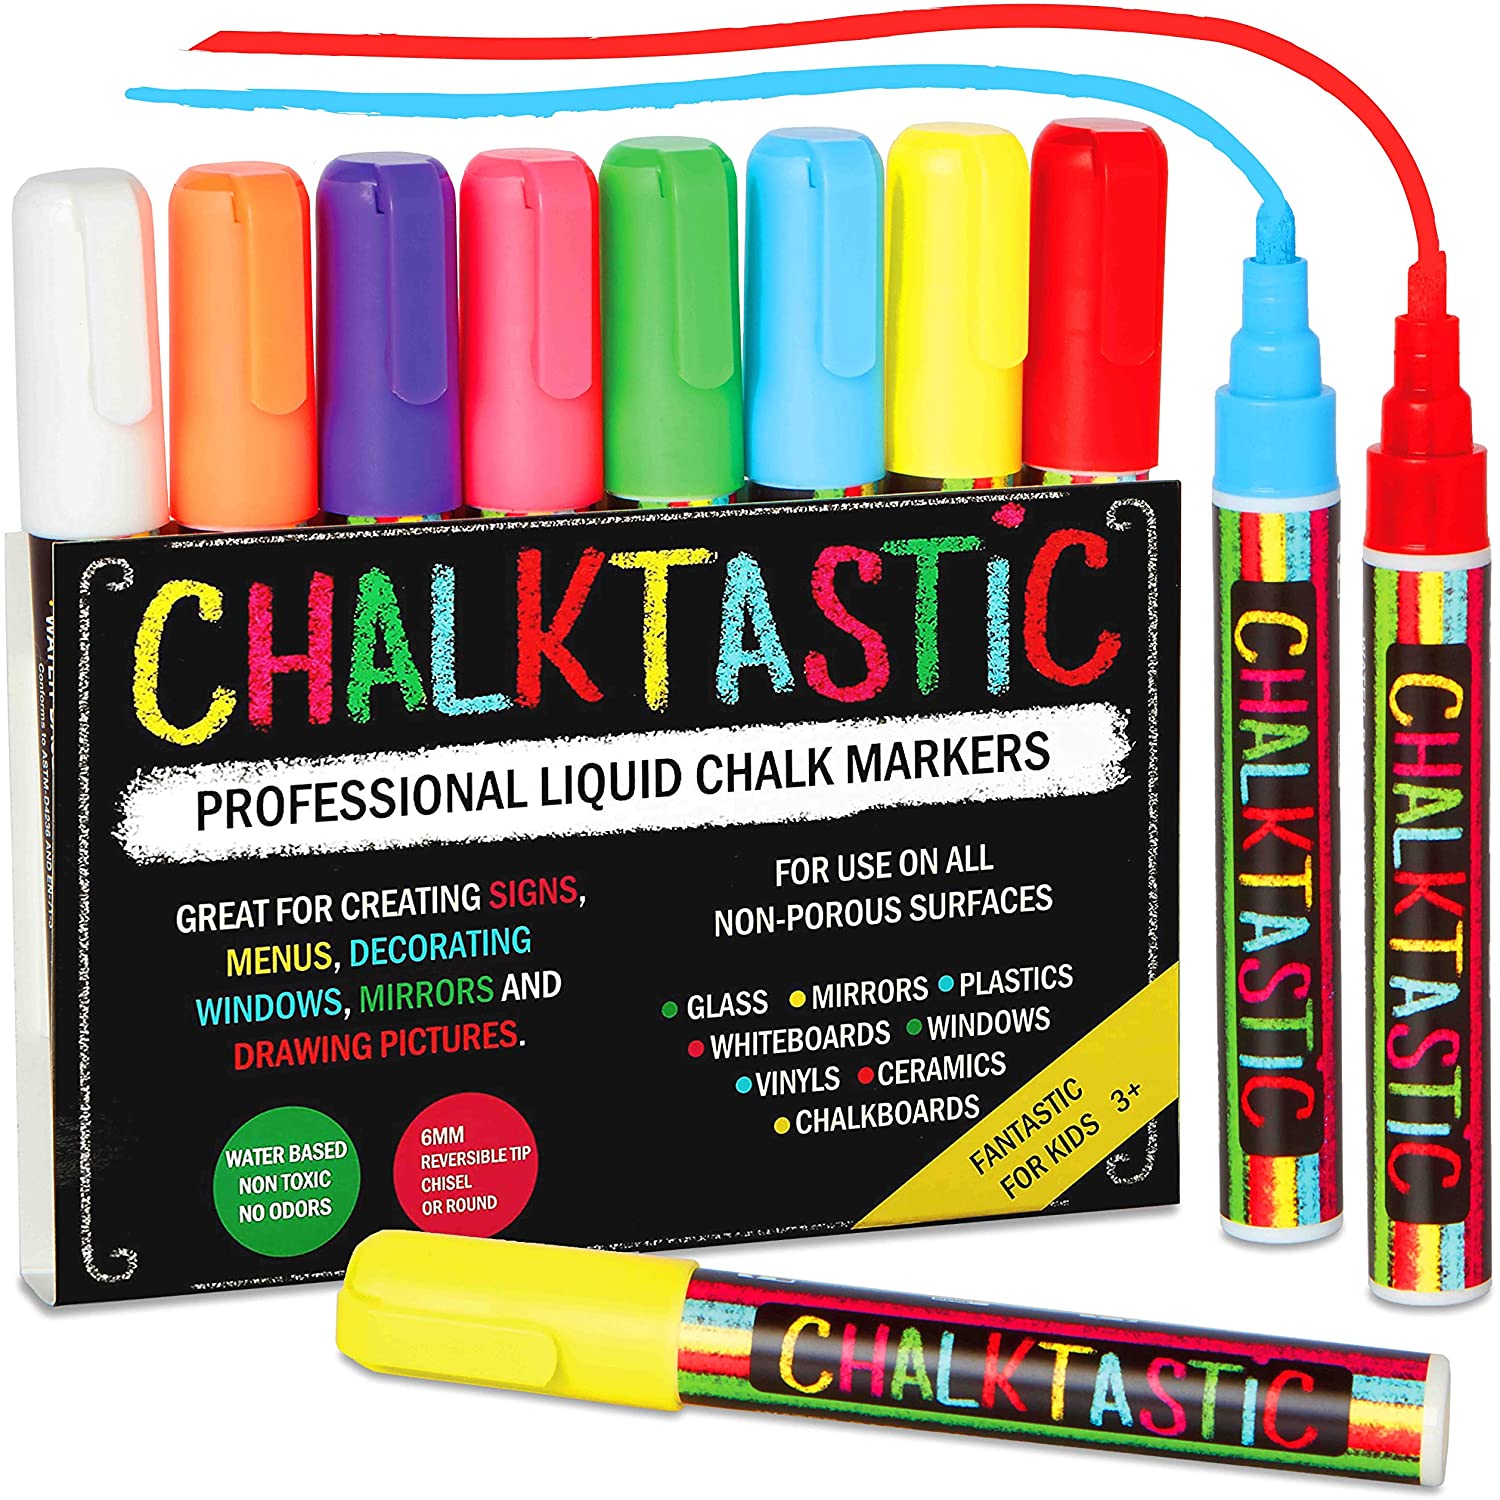 Amazon: ChalkTastic Bright Chalk Marker Professional Pens Pack of 8 $9.99 + FS with PRIME